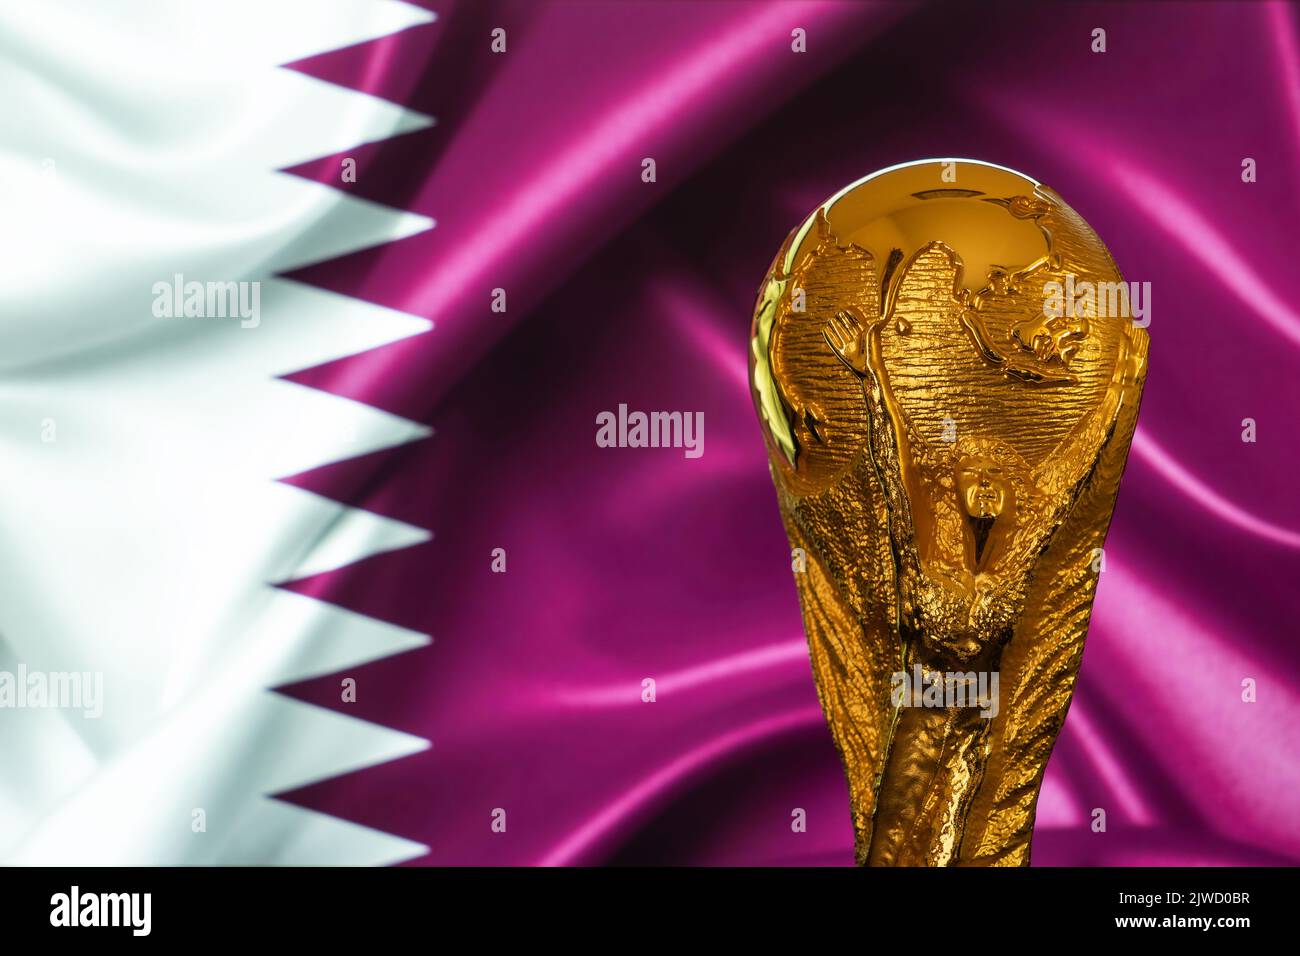 Doha, Qatar - September 4, 2022: FIFA World Cup trophy against the background of Qatar flag. Stock Photo